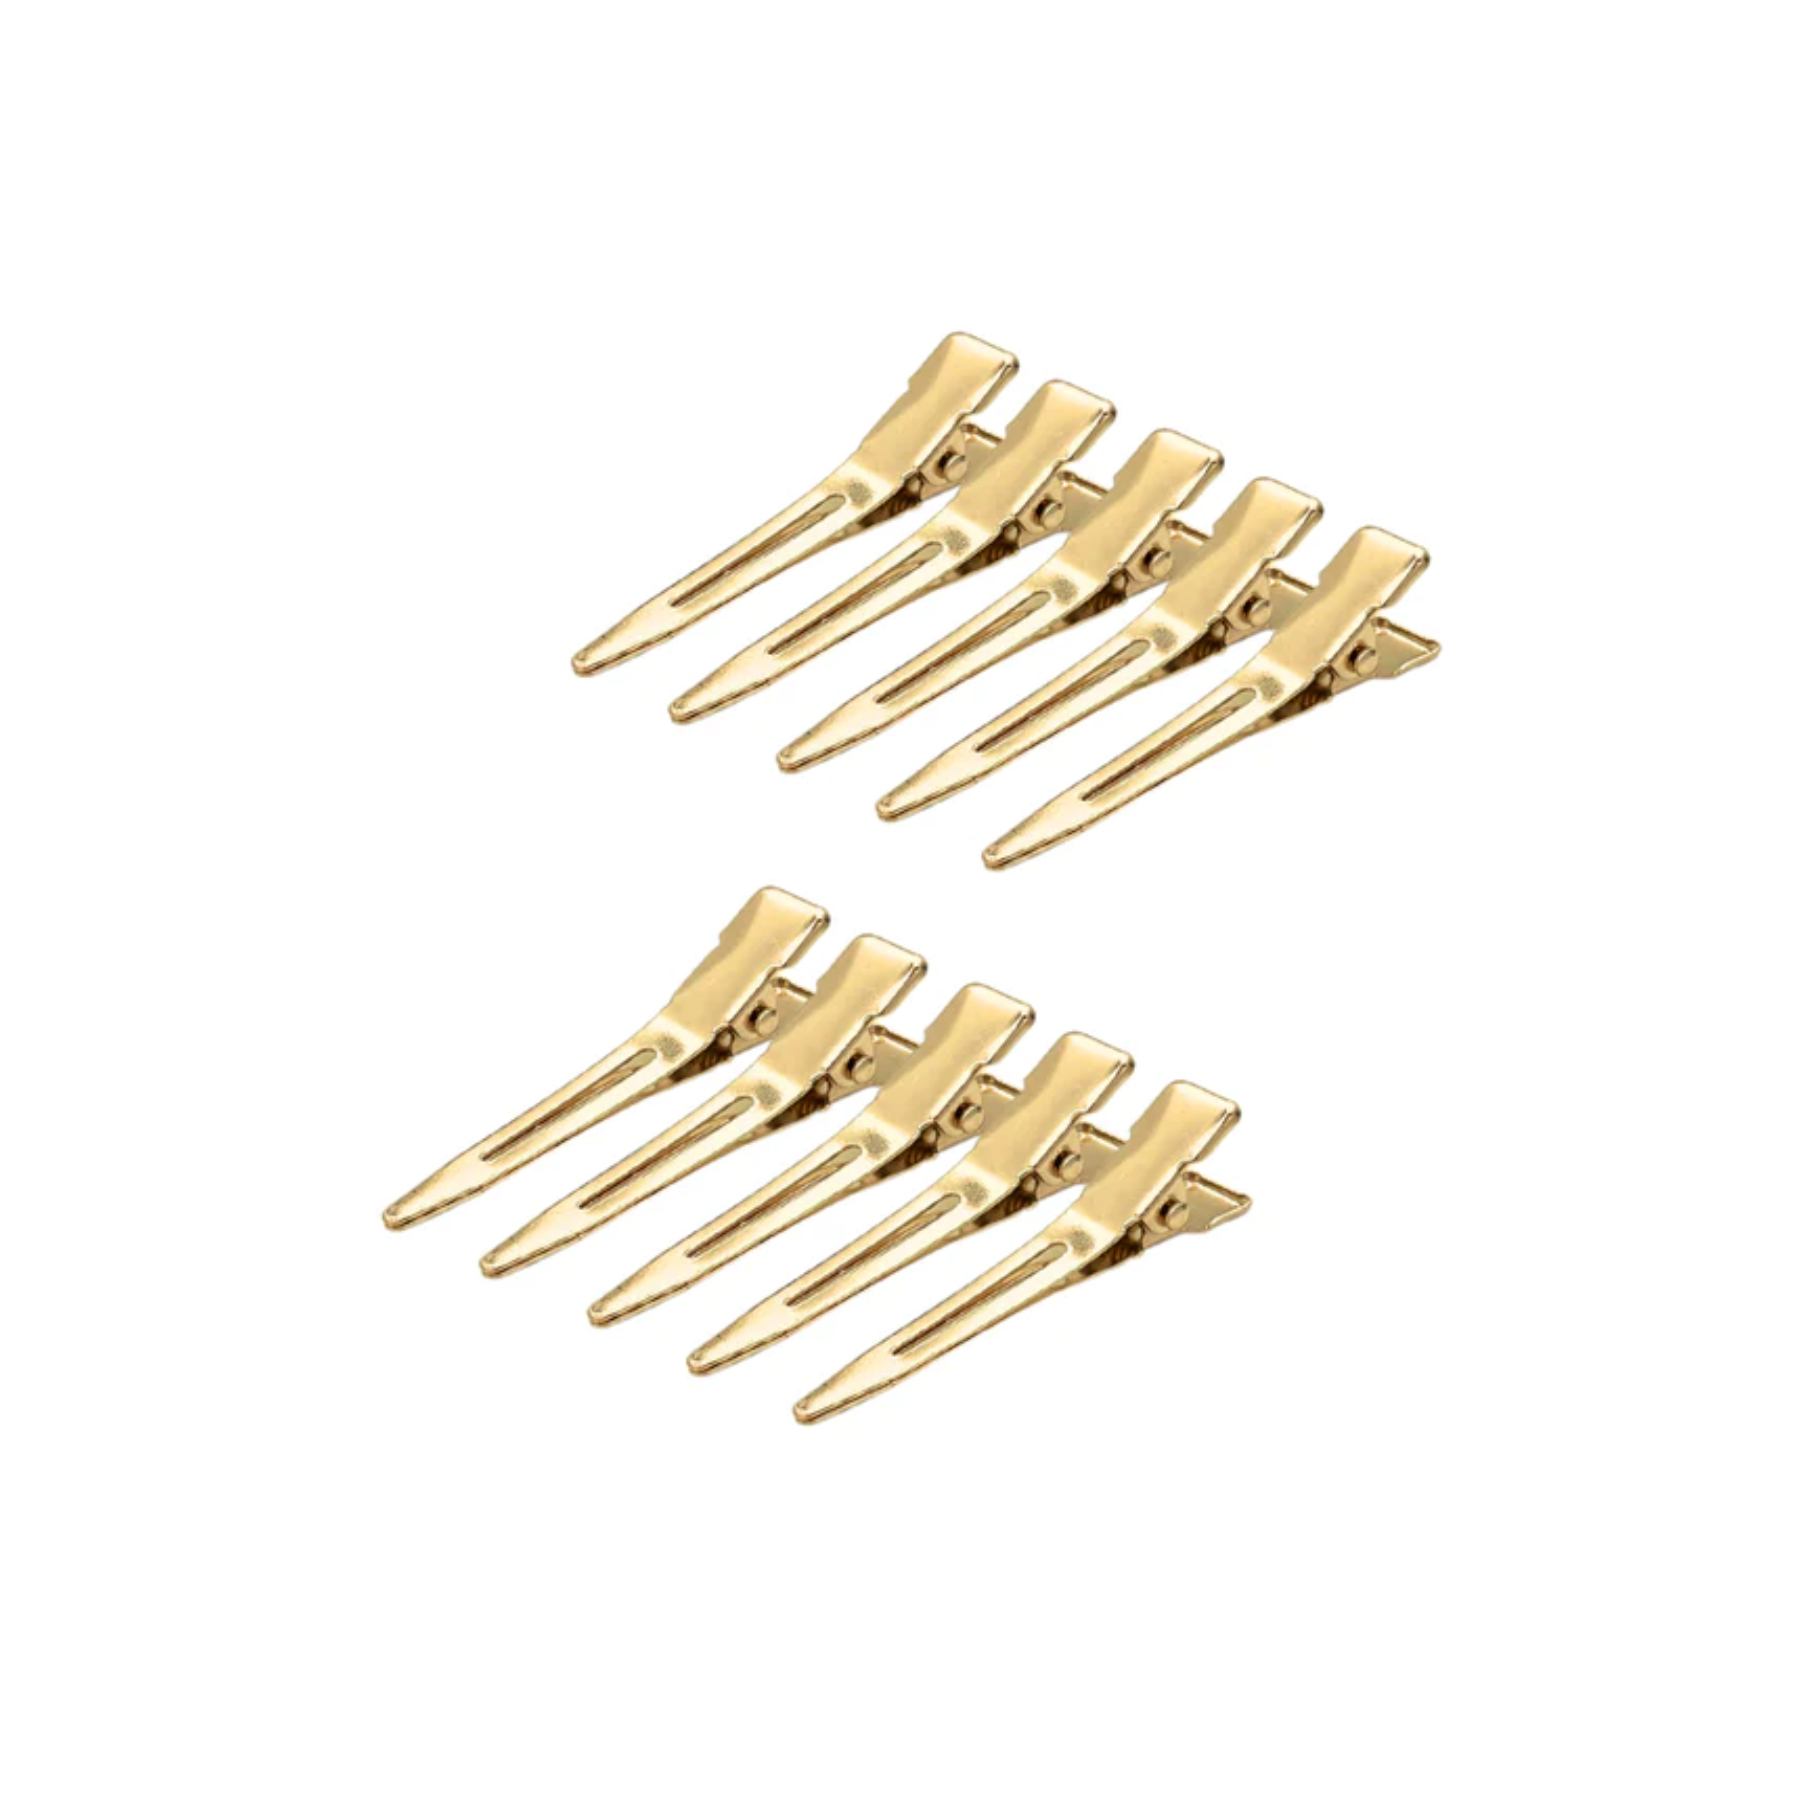 Gold Marking Clips (10)